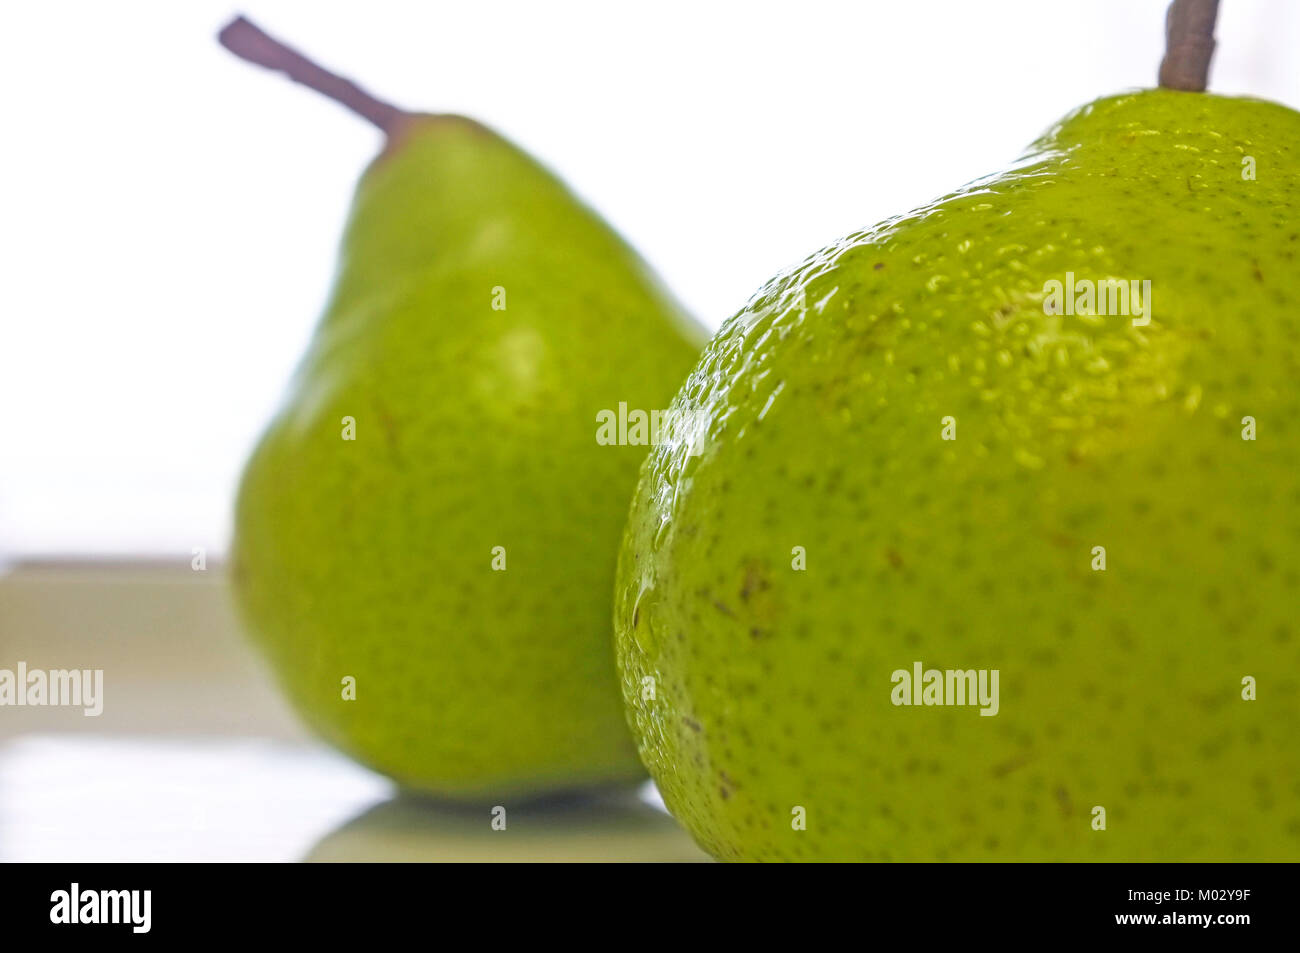 Two pears against a white background. Stock Photo